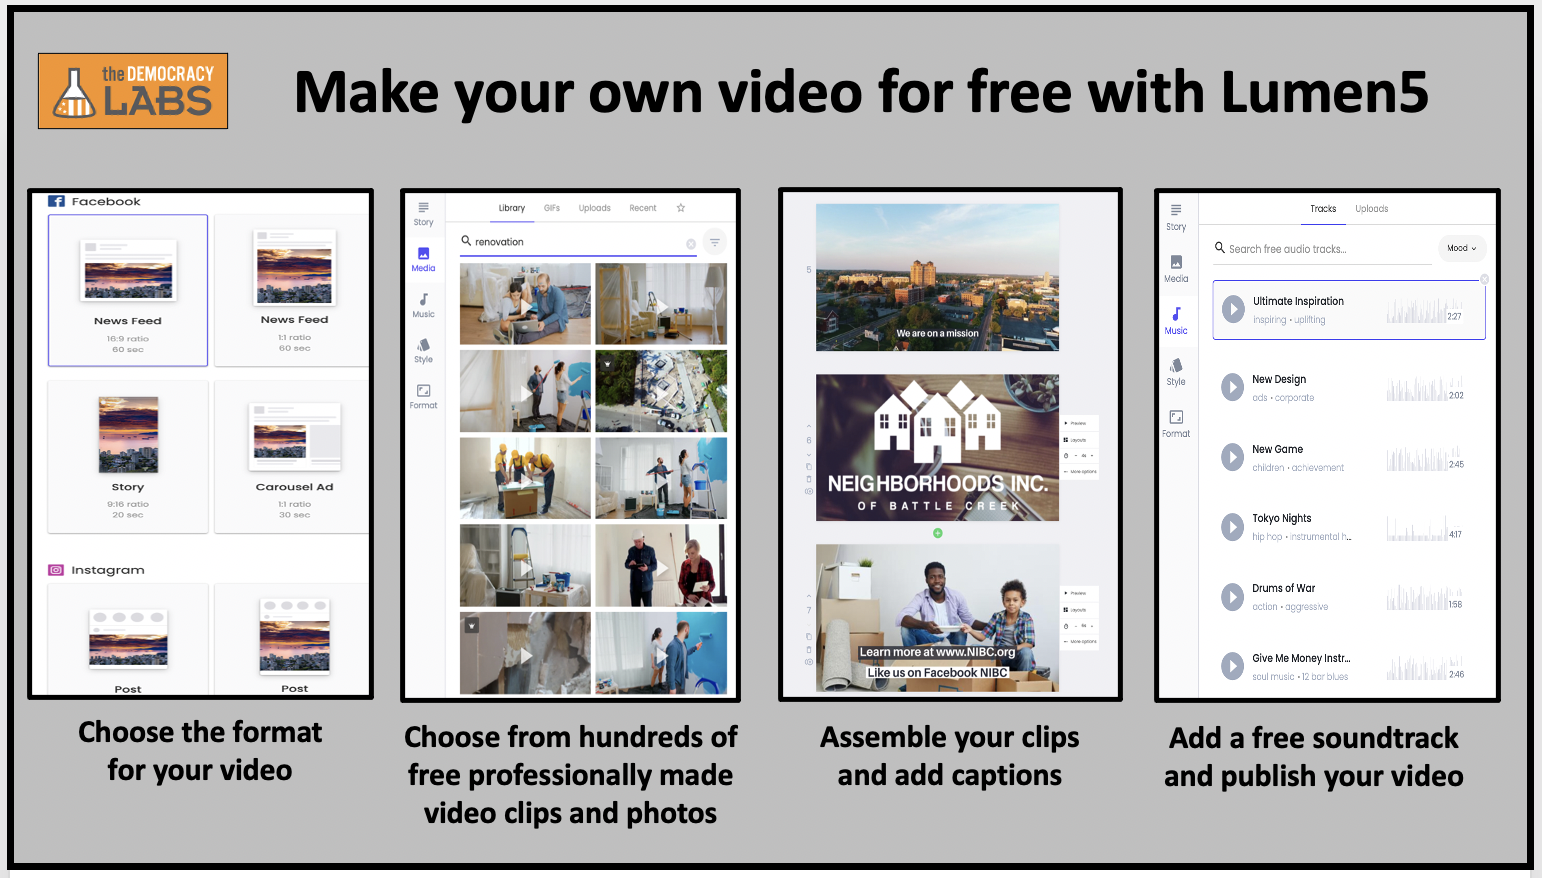 Create your own fundraising video in hours, for free with Lumen5